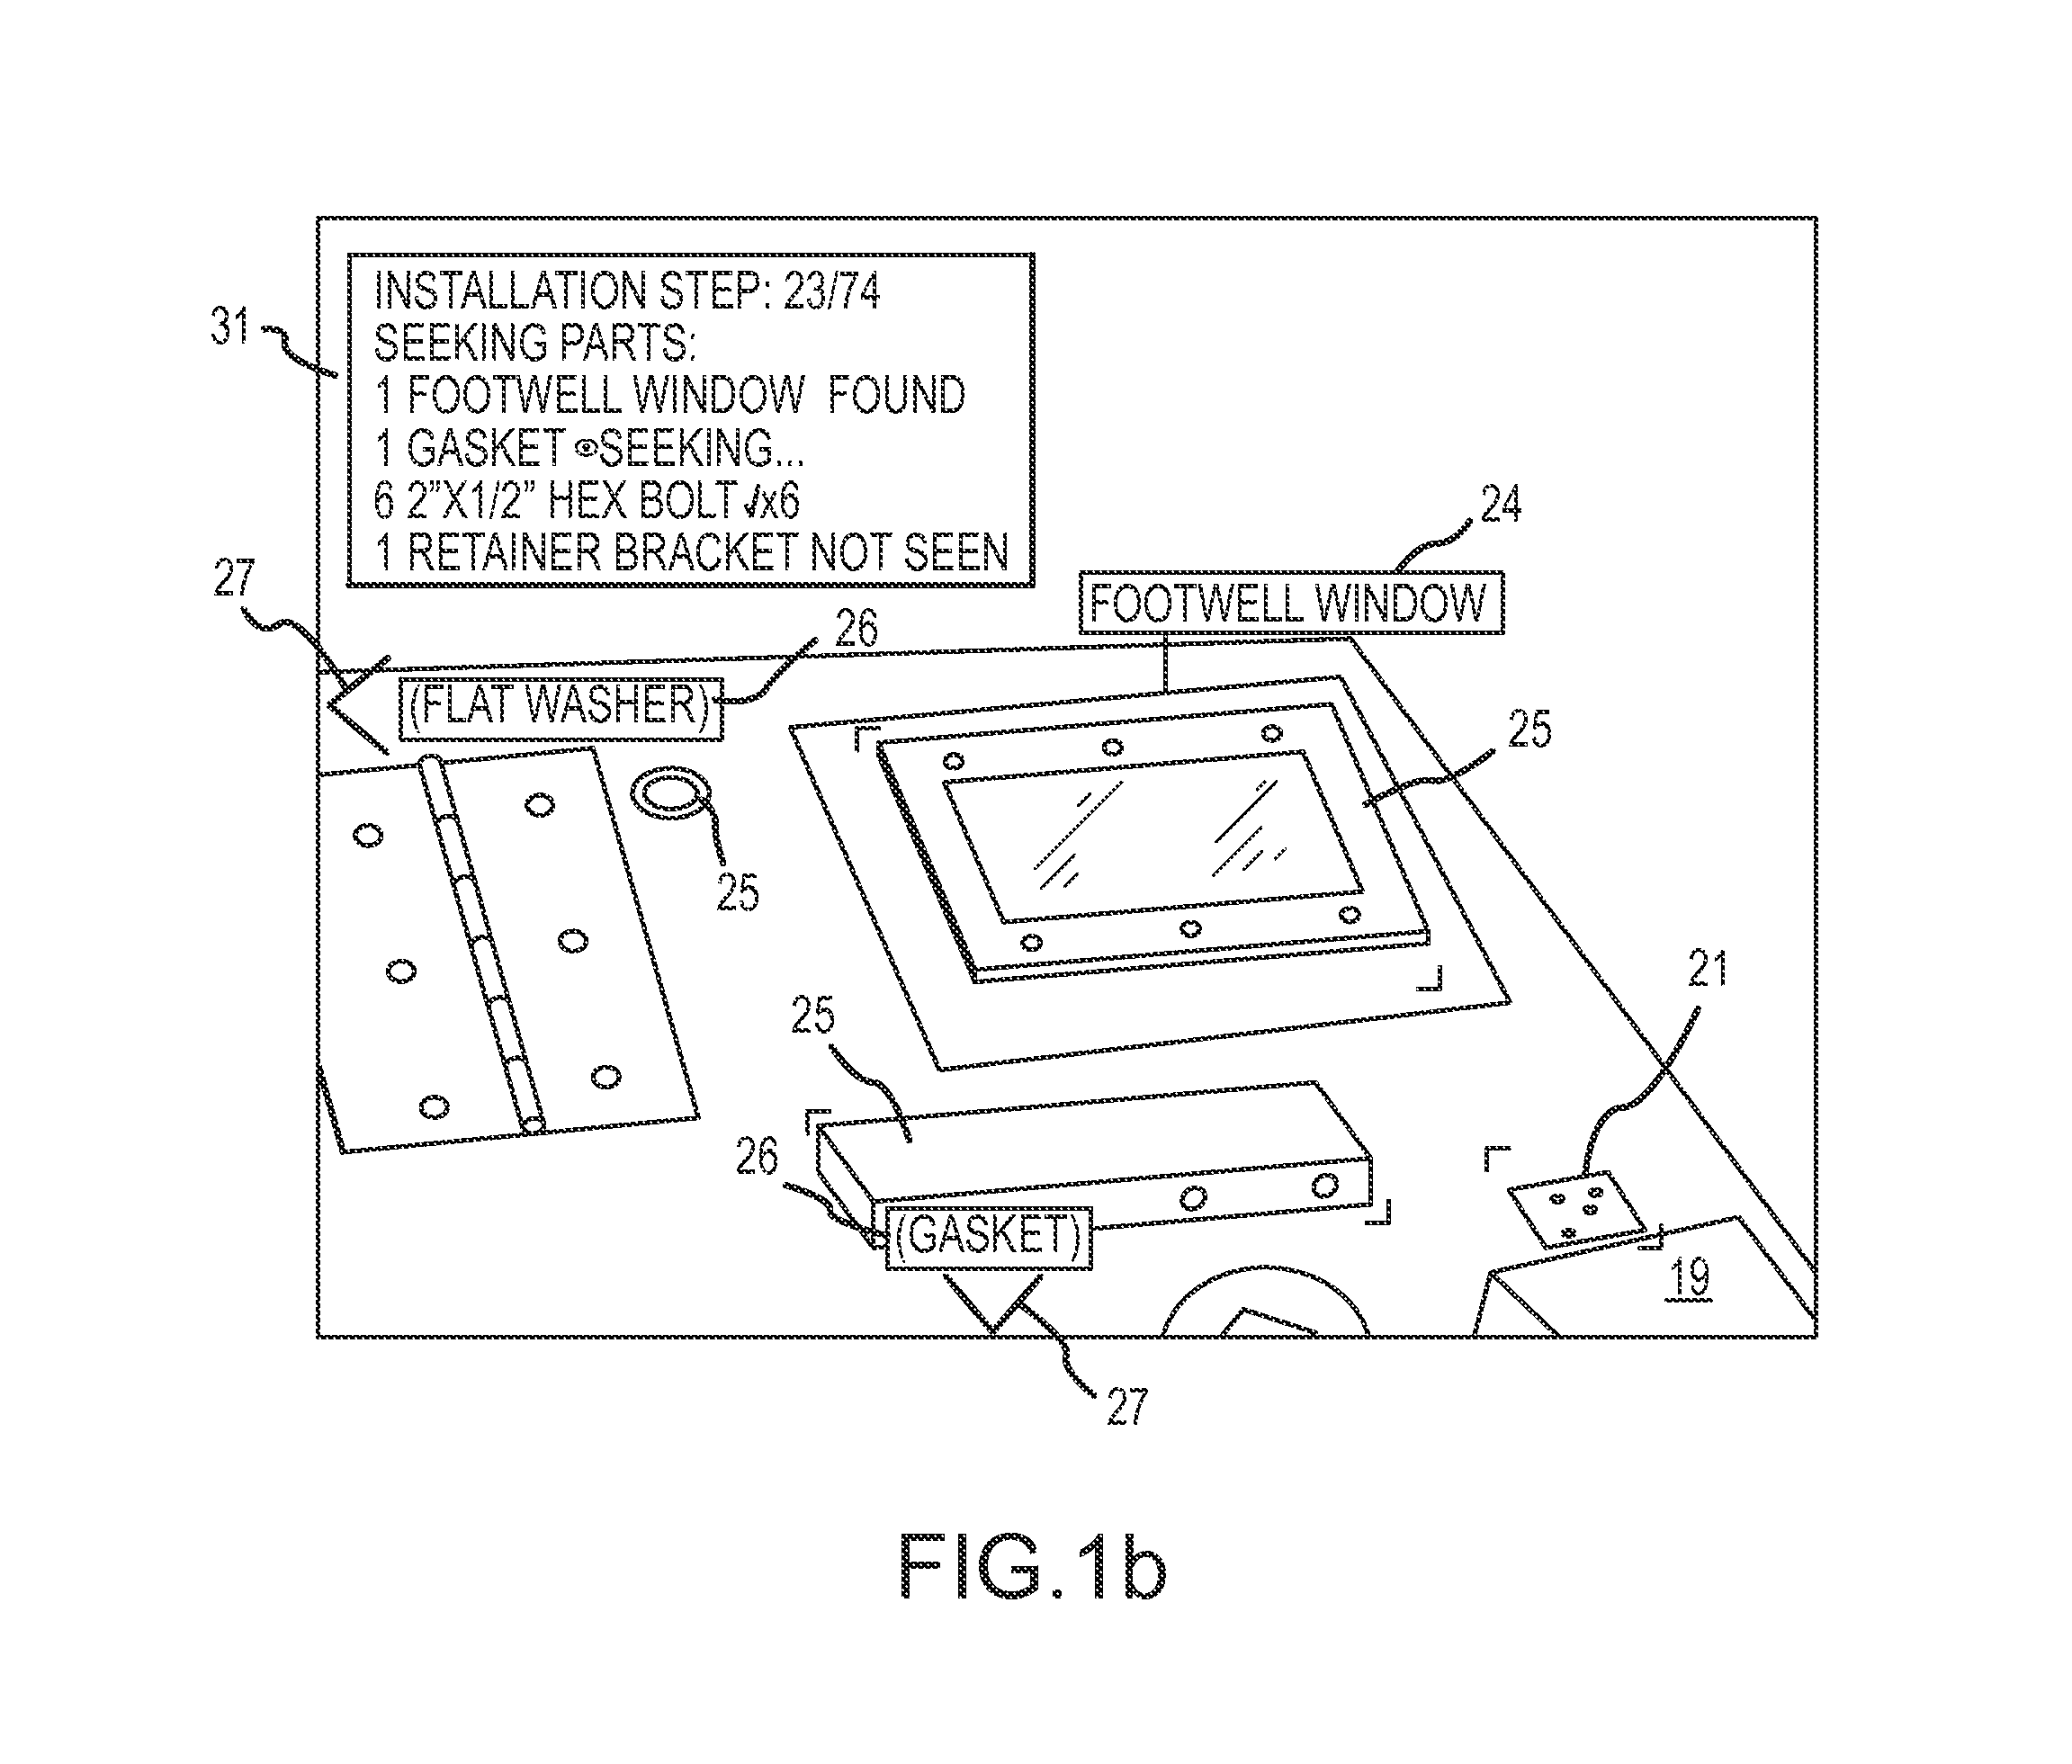 Augmented reality (AR) system and method for tracking parts and visually cueing a user to identify and locate parts in a scene